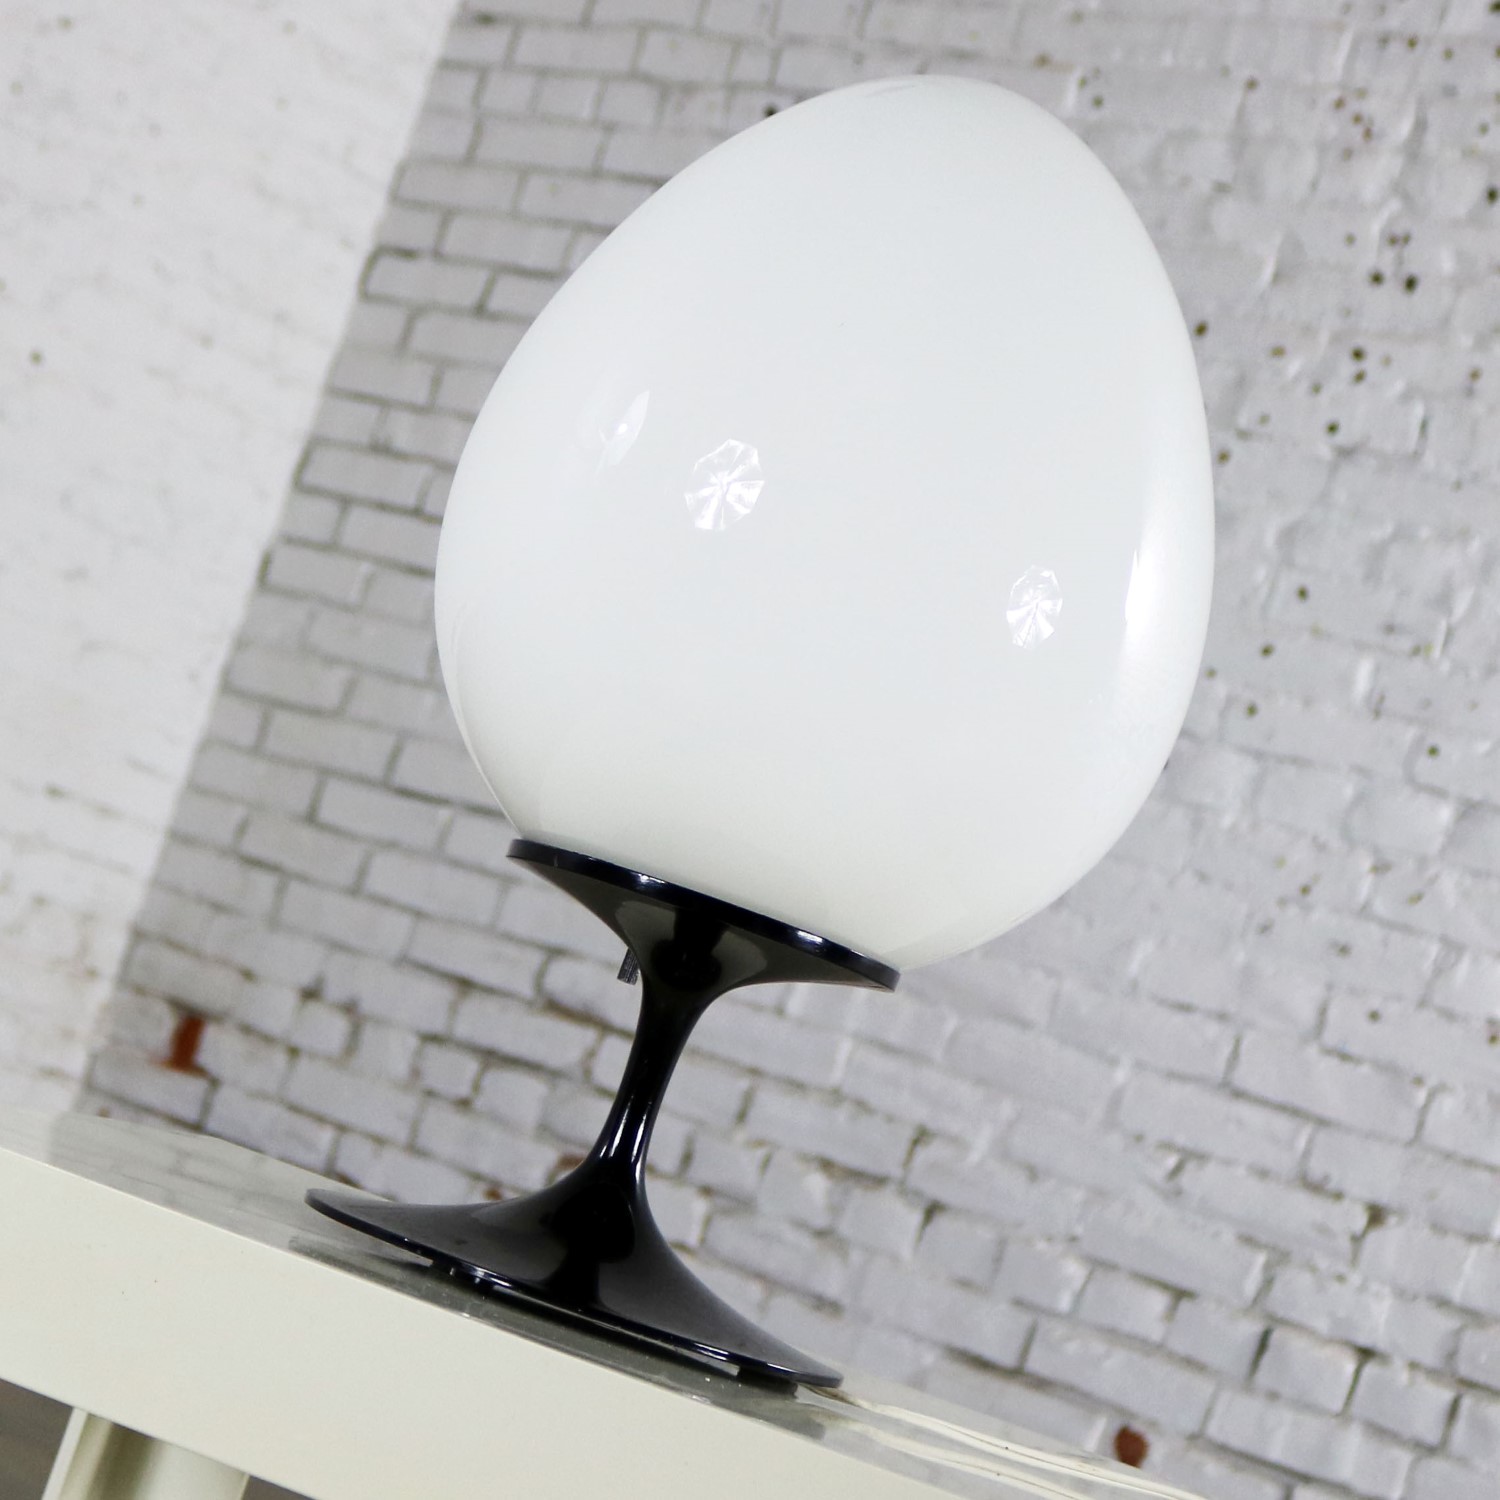 Bill Curry Stemlite Tulip Base Table Lamp for Design Line with Egg Shaped White Globe